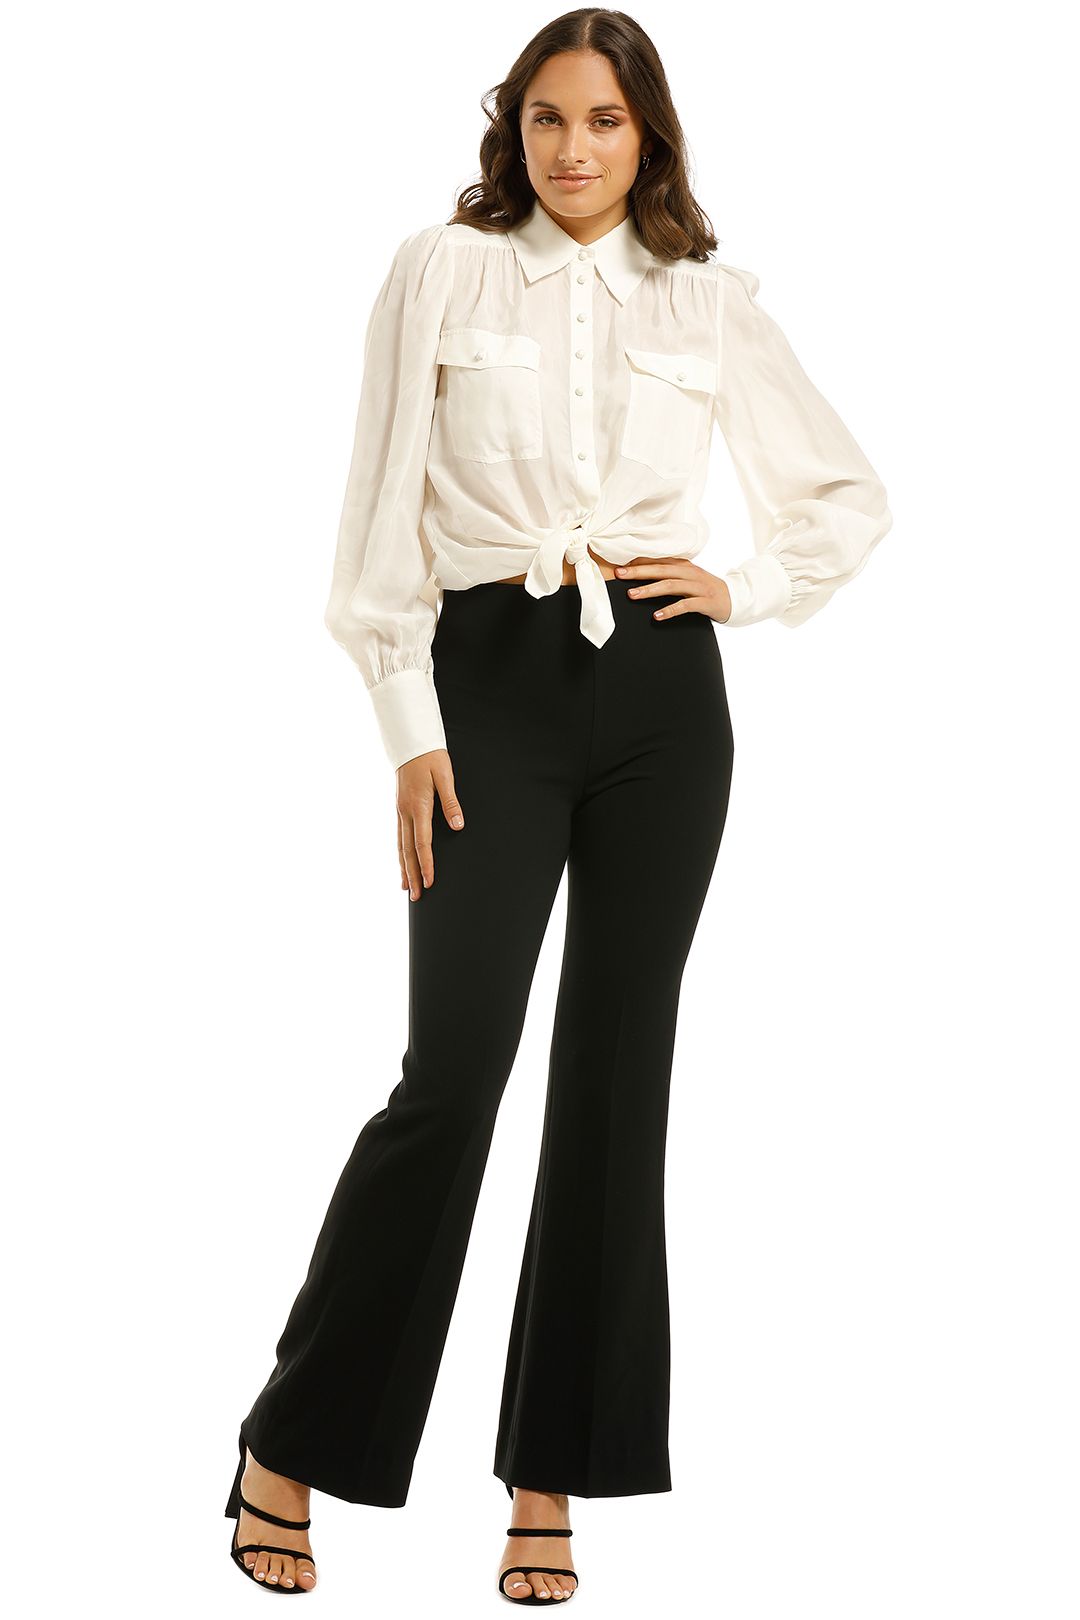 Country-Road-High-Waist-Flare-Pant-Black-Front